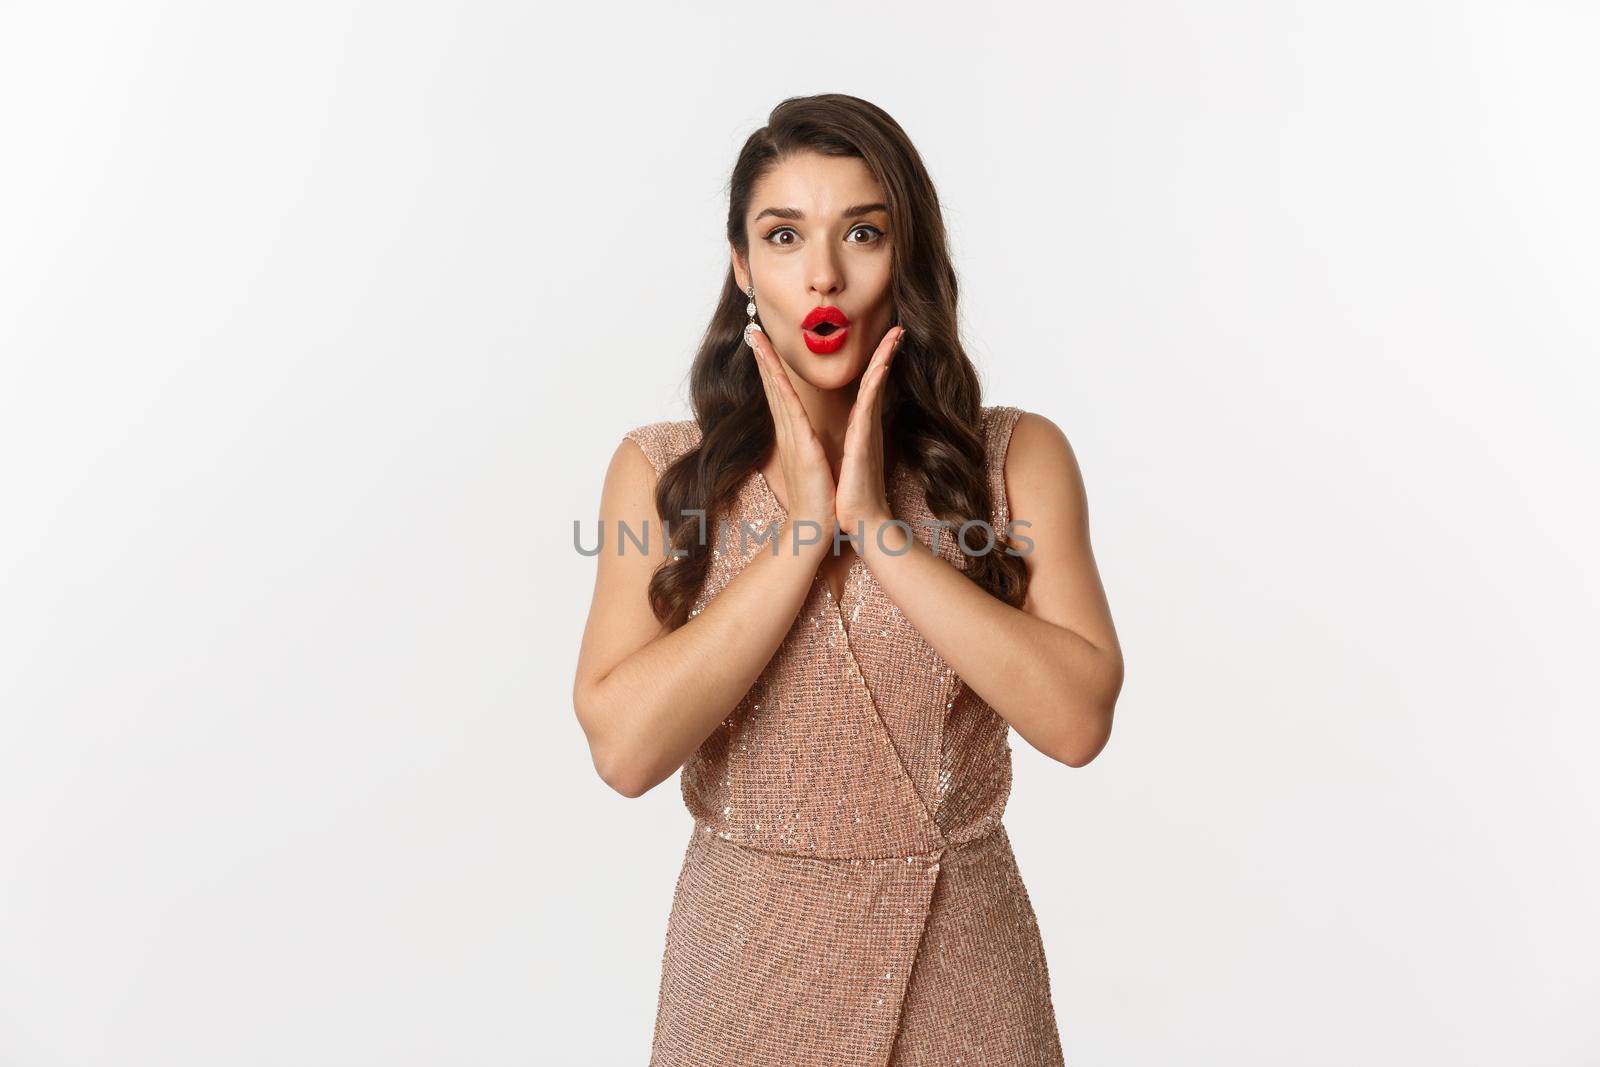 Celebration and Christmas. Attractive young woman looking surprised at New Year gift, wearing evening dress for party, stare at camera amazed, standing over white background.